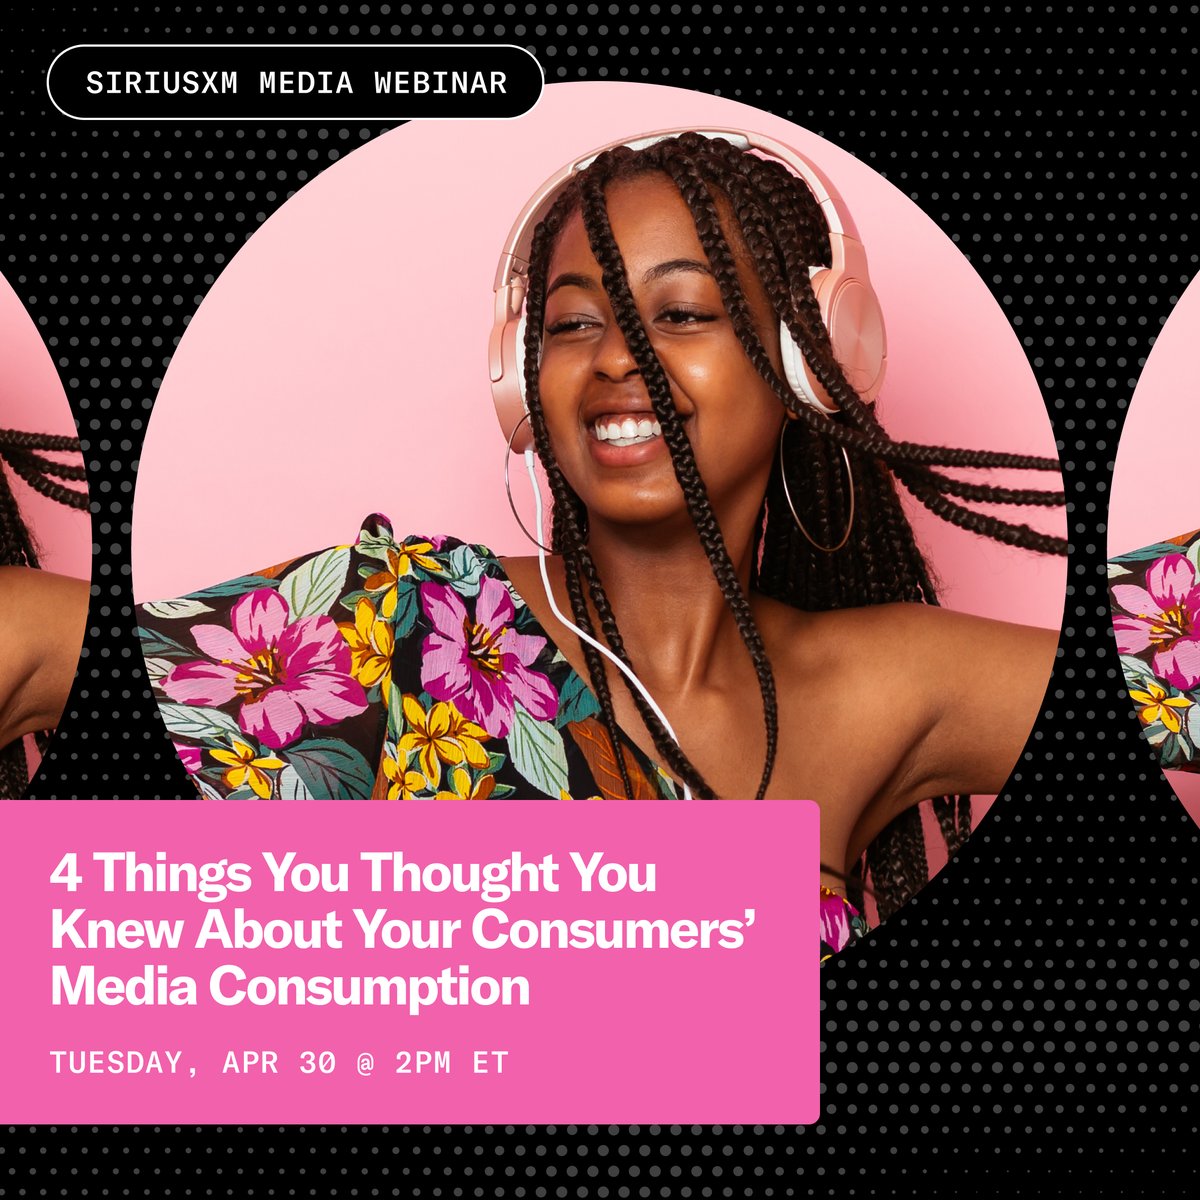 Think you know where your #consumers are spending their #mediatime? 🤔 

Join our next #webinar, where we’ll: 

✅ Debunk common consumer myths 
✅ Share the latest data on consumer habits
✅ Offer top #audioad strategies 

RSVP here: bit.ly/3Q193k4

#consumertrends